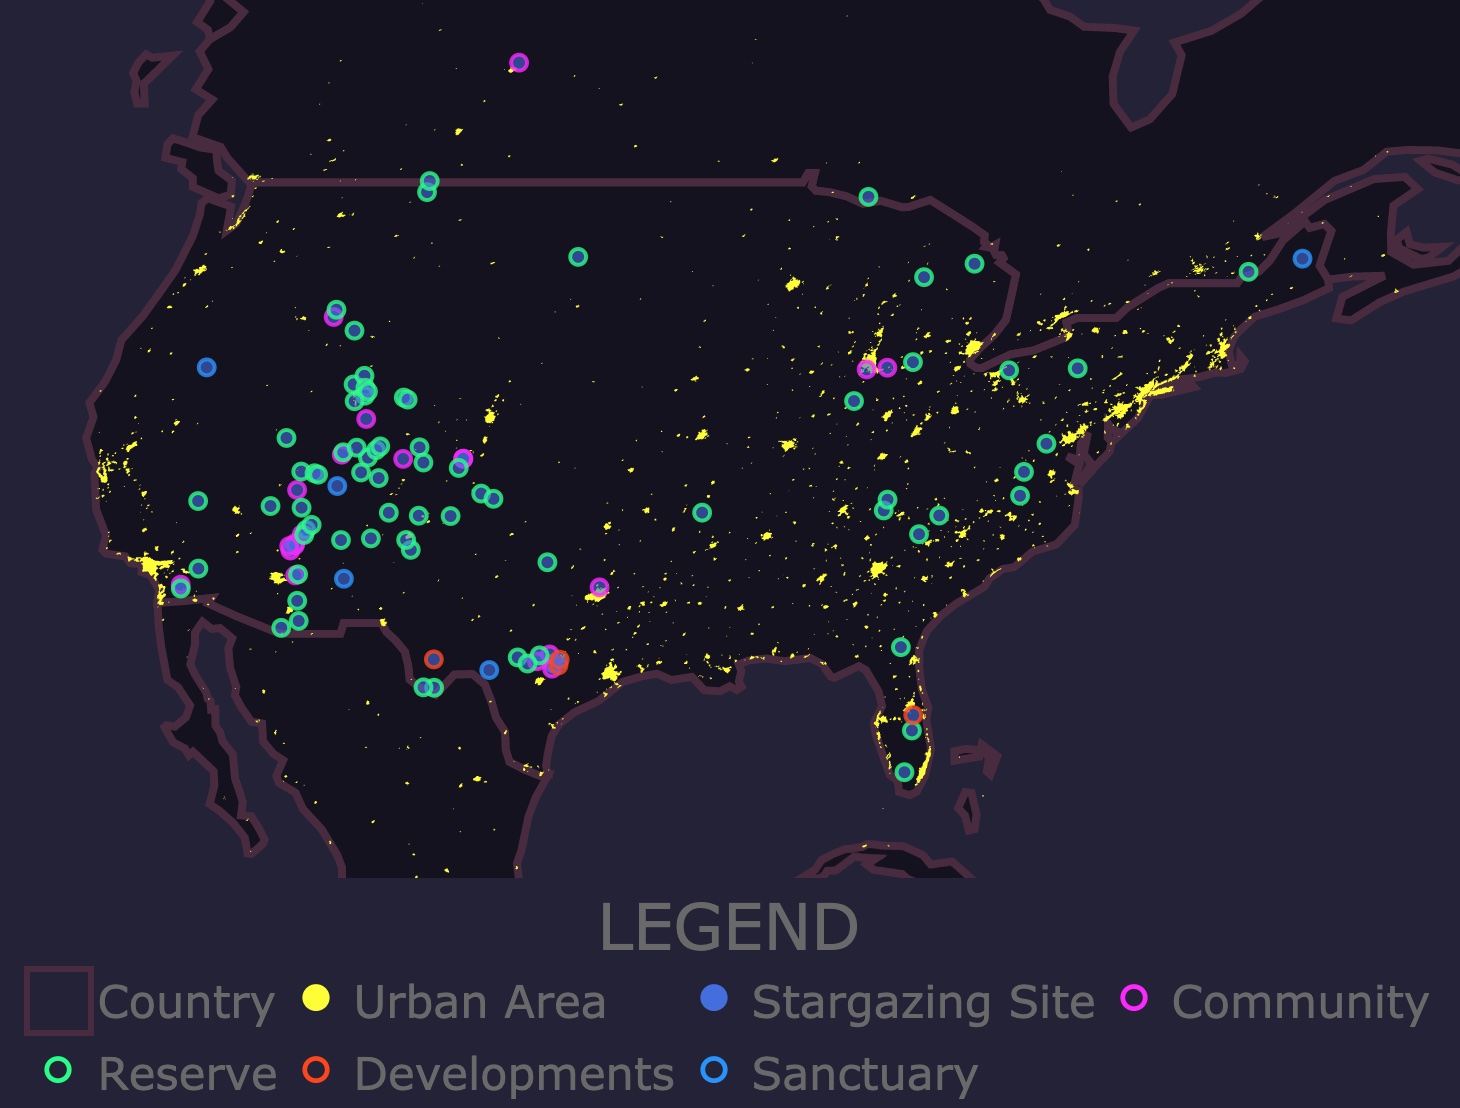 Stargazing sites in the USA